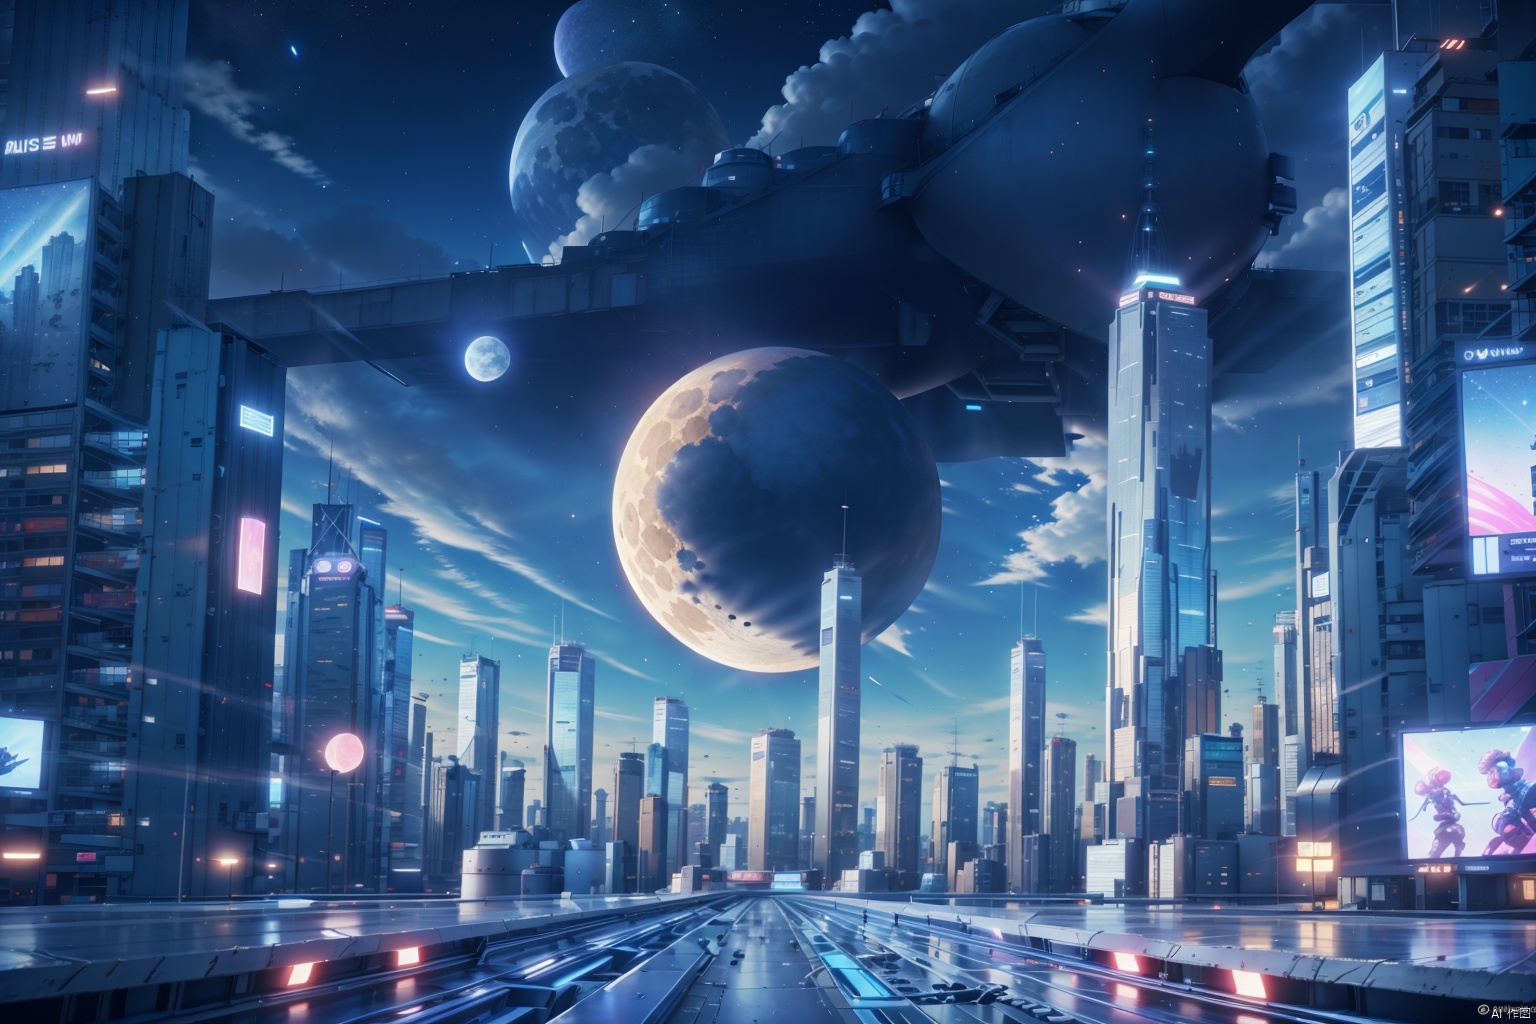  A large, cylindrical building dominates the skyline of a city on a distant planet. The building is made of metal and has a complex, geometric design. It is surrounded by other tall buildings and a bustling city. The sky is dark, and there are stars and a blue moon in the distance.